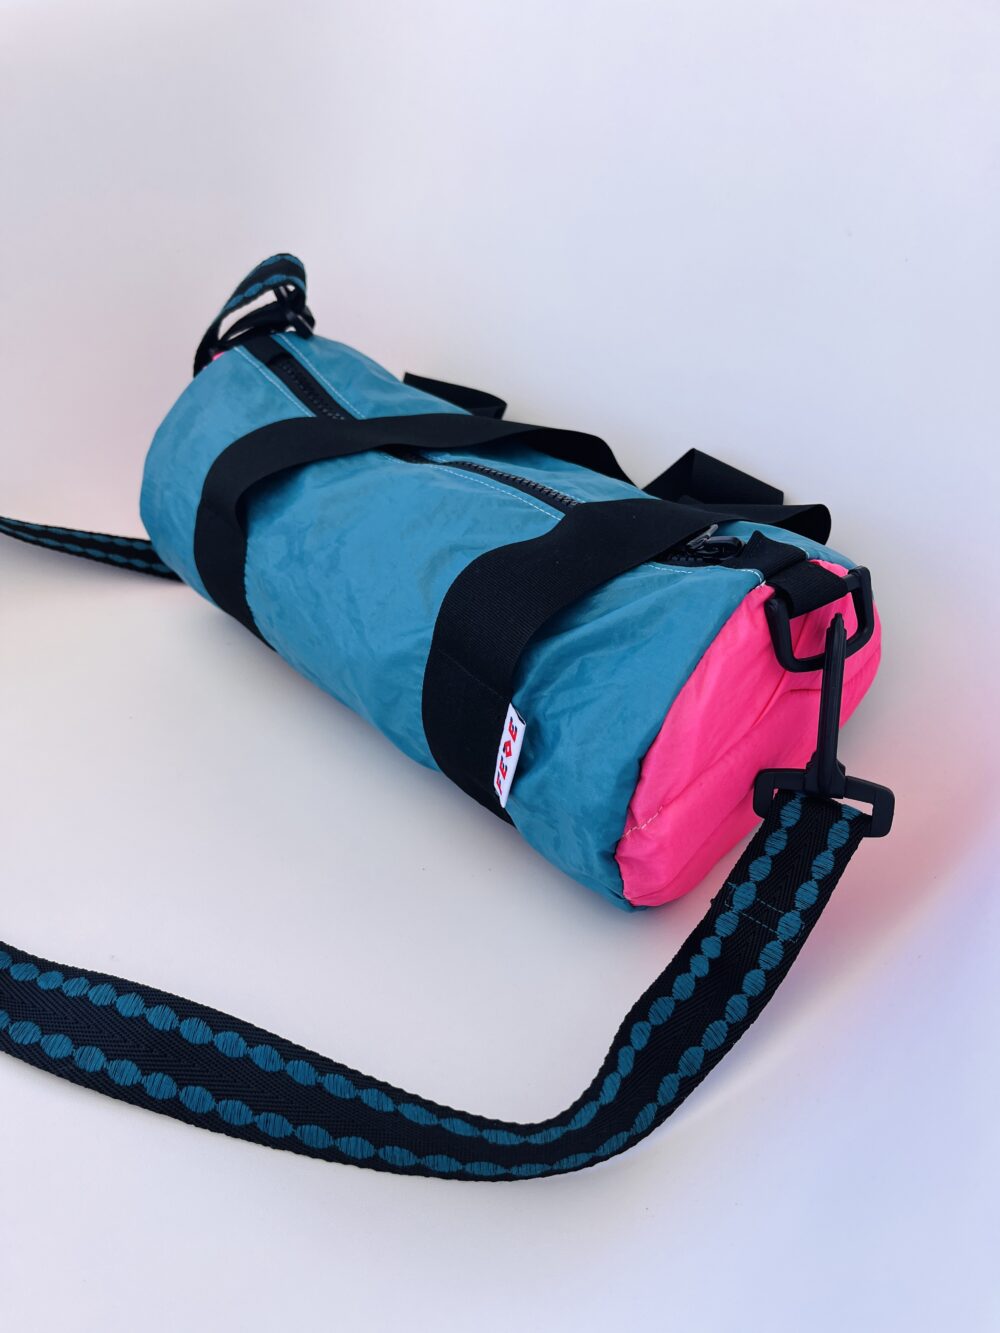 Onda Mini Duffle - Once was a sail by Fede Surfbags